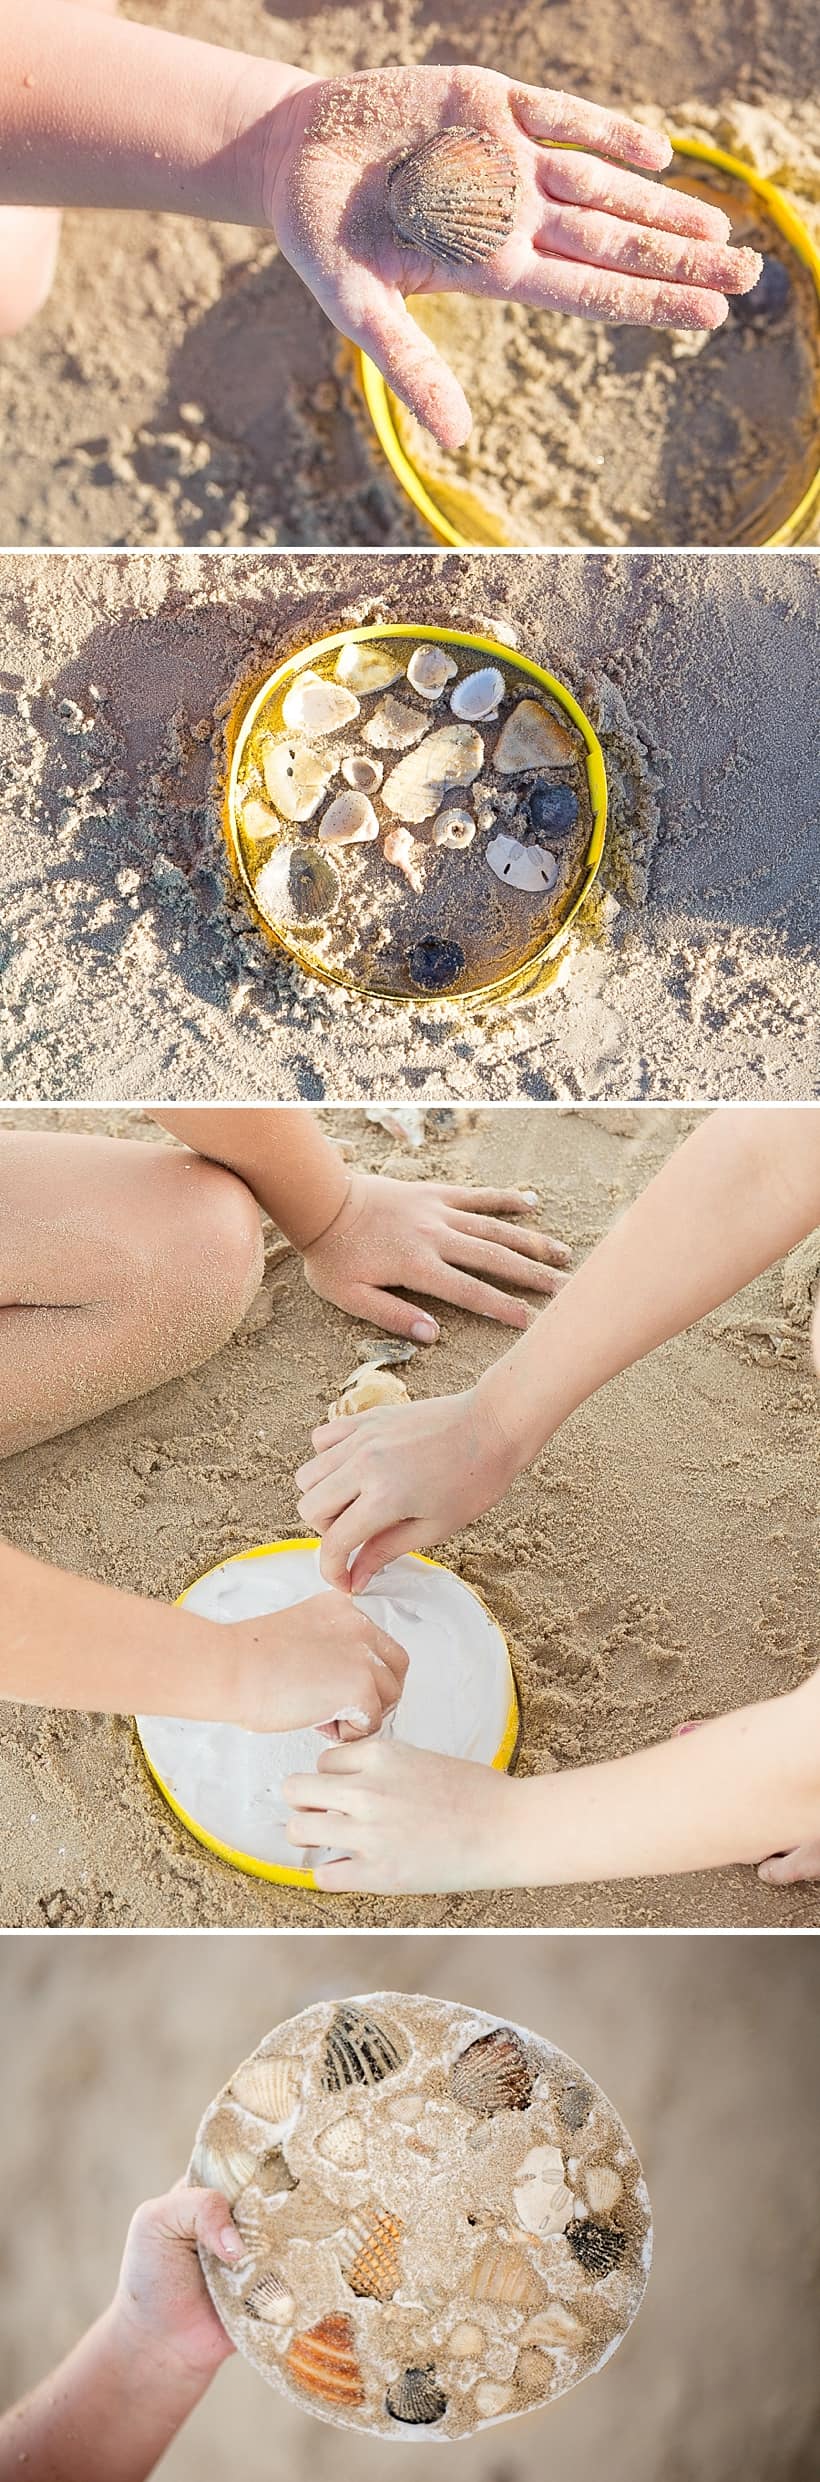 This sand casting kit for children is crazy cool. What a great way to have fun at the beach and make memories on a family vacation. *Bookmarking these travel ideas for later. Must-read for parents.